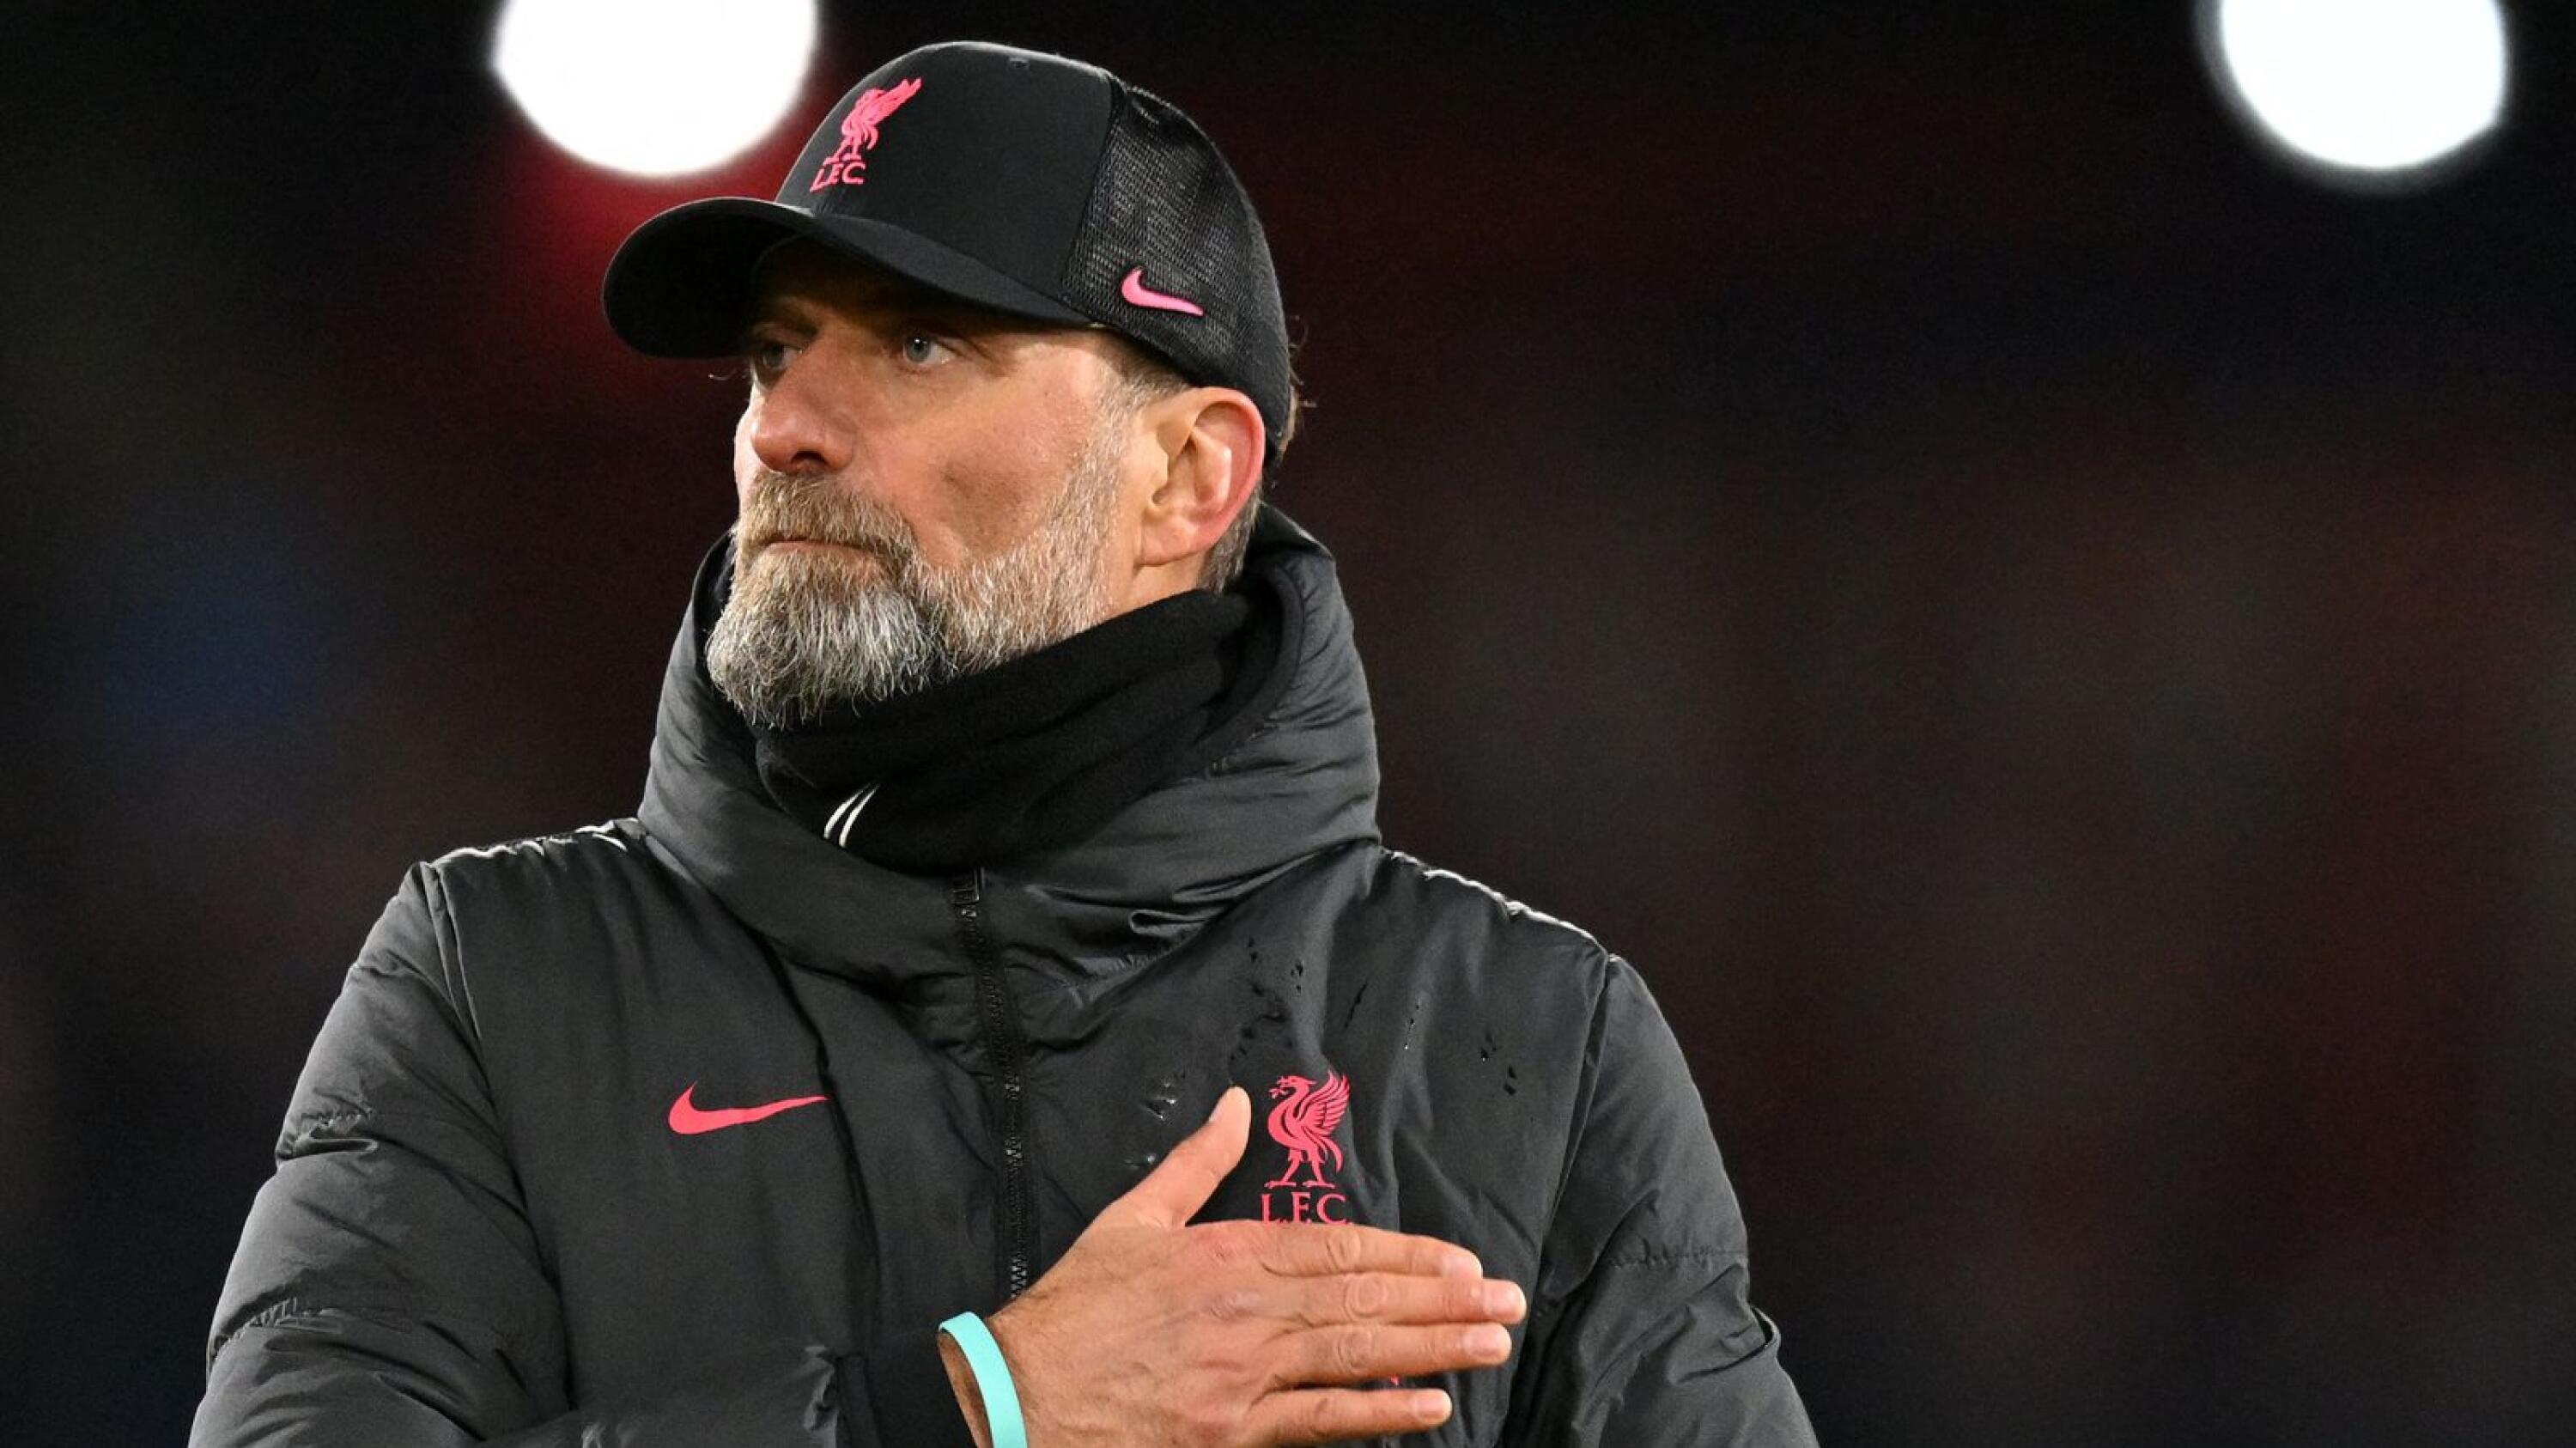 Liverpool manager Jurgen Klopp reacts after their Premier League clash against Crystal Palace